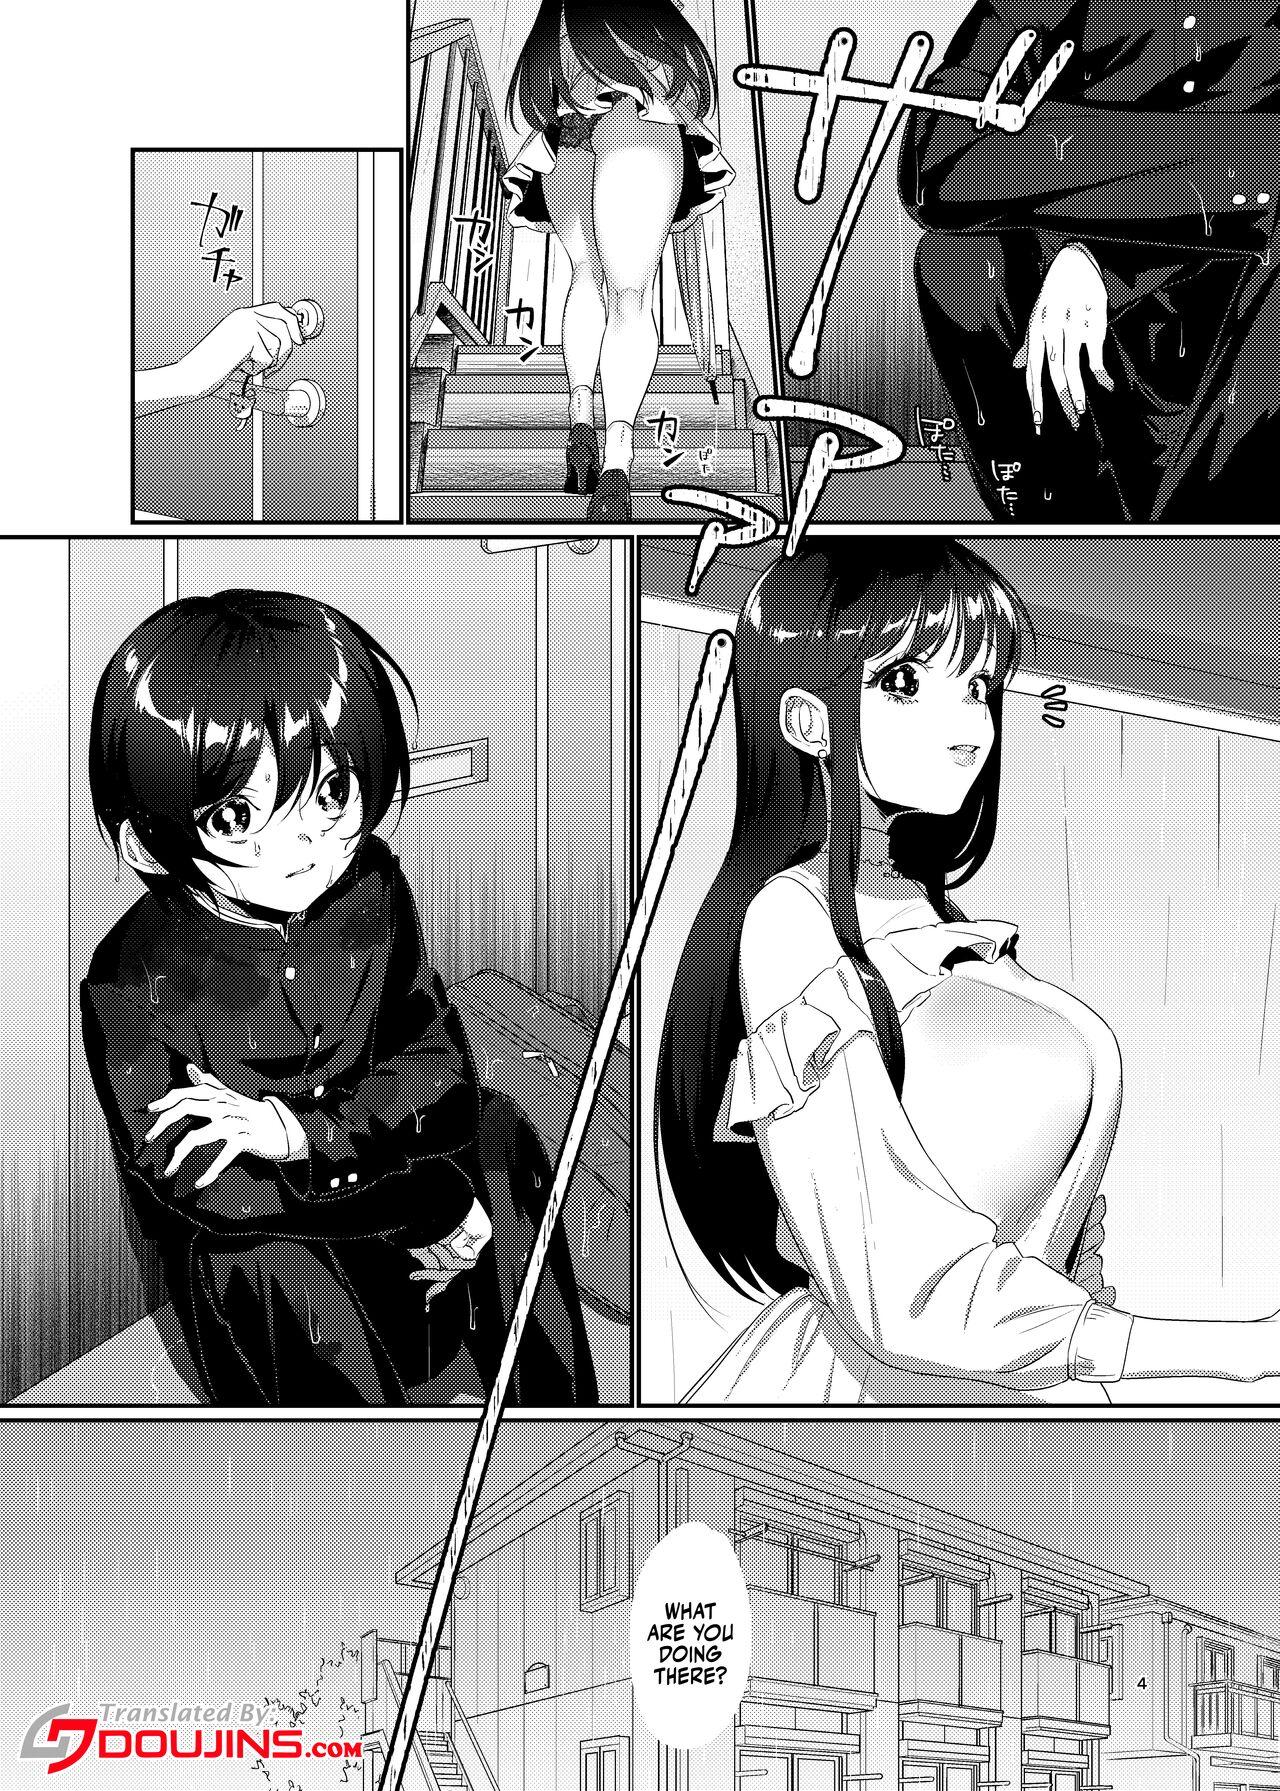 Best Blowjobs Ame, Nochi to Nari no Onee-san | Ame, Later Sister - Original Fellatio - Page 3